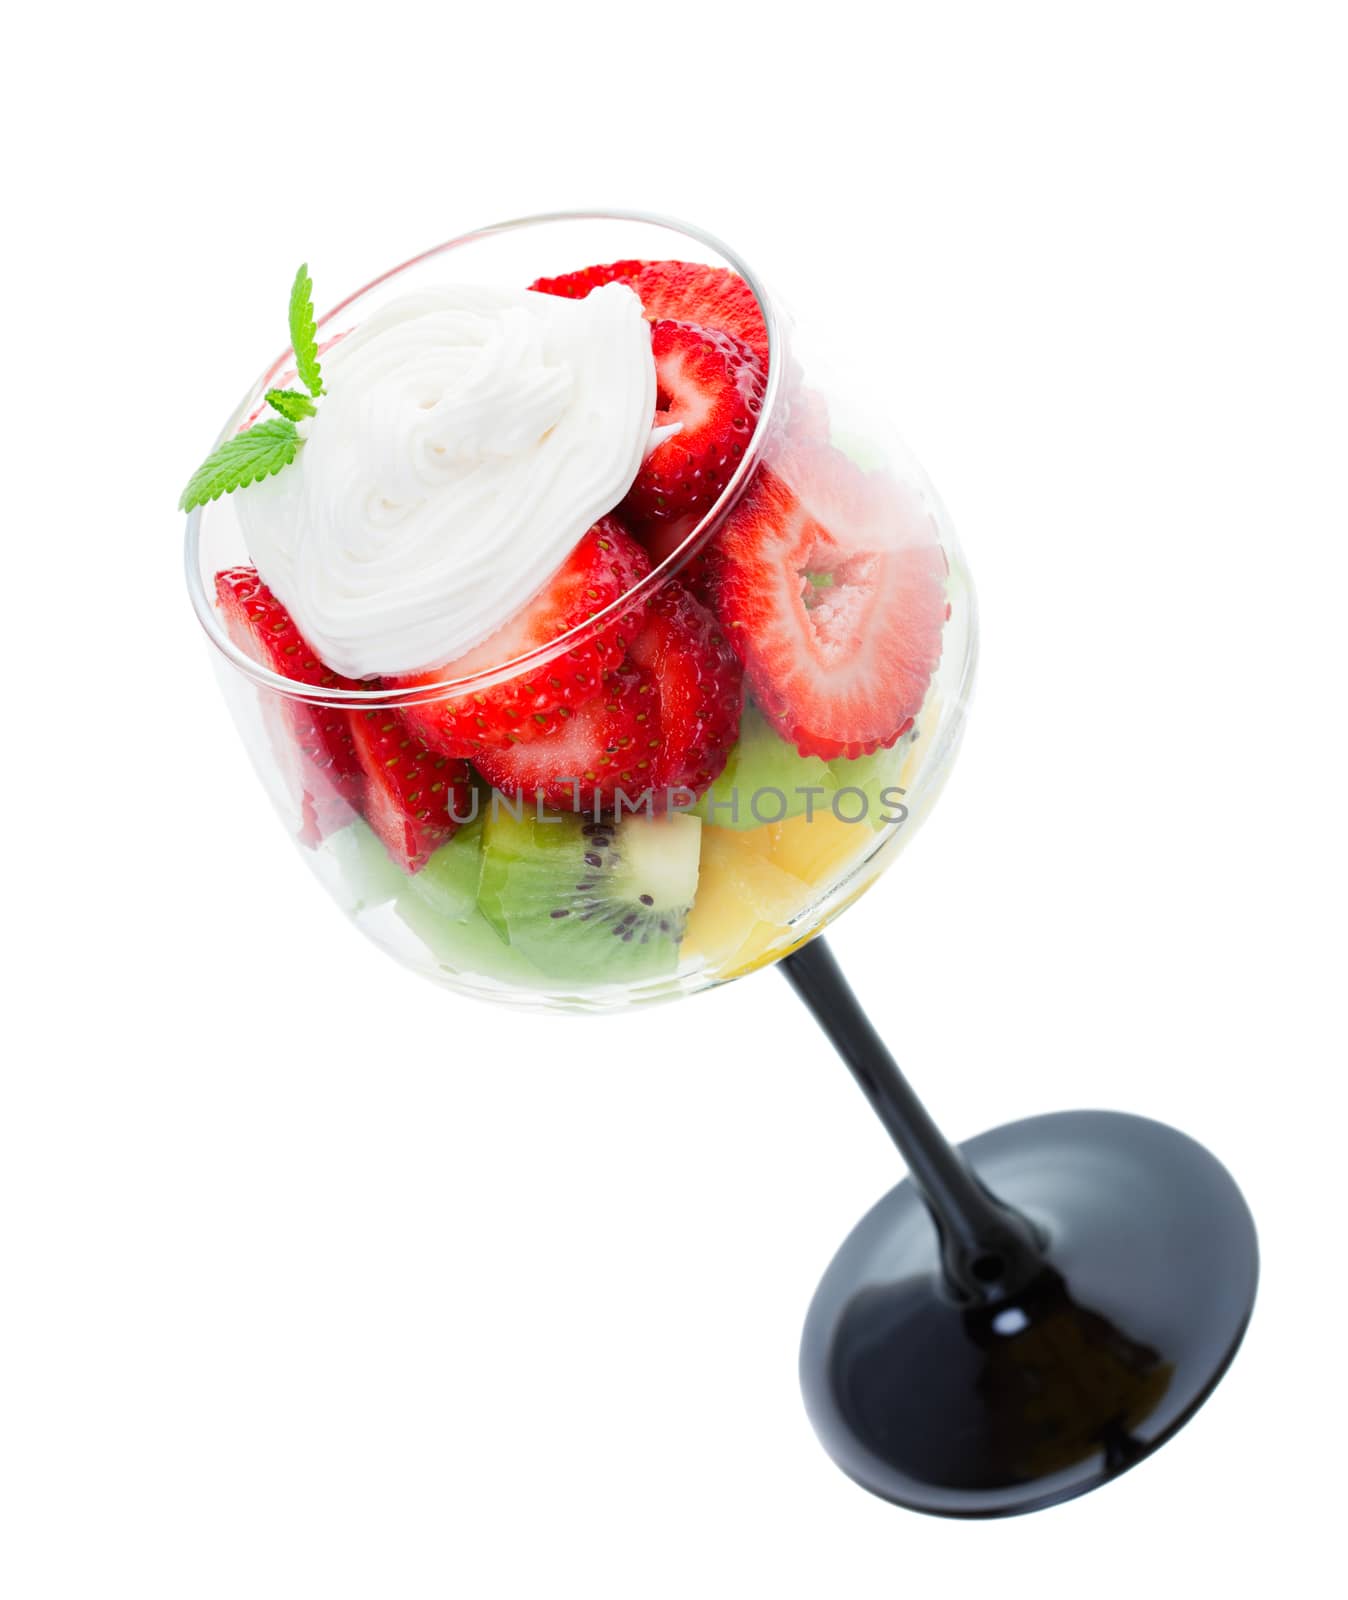 Fresh strawberries, kiwi, & pineapple, topped with whipped cream and a sprig of fresh mint, and served in an elegant wine goblet.  Shot on white background.